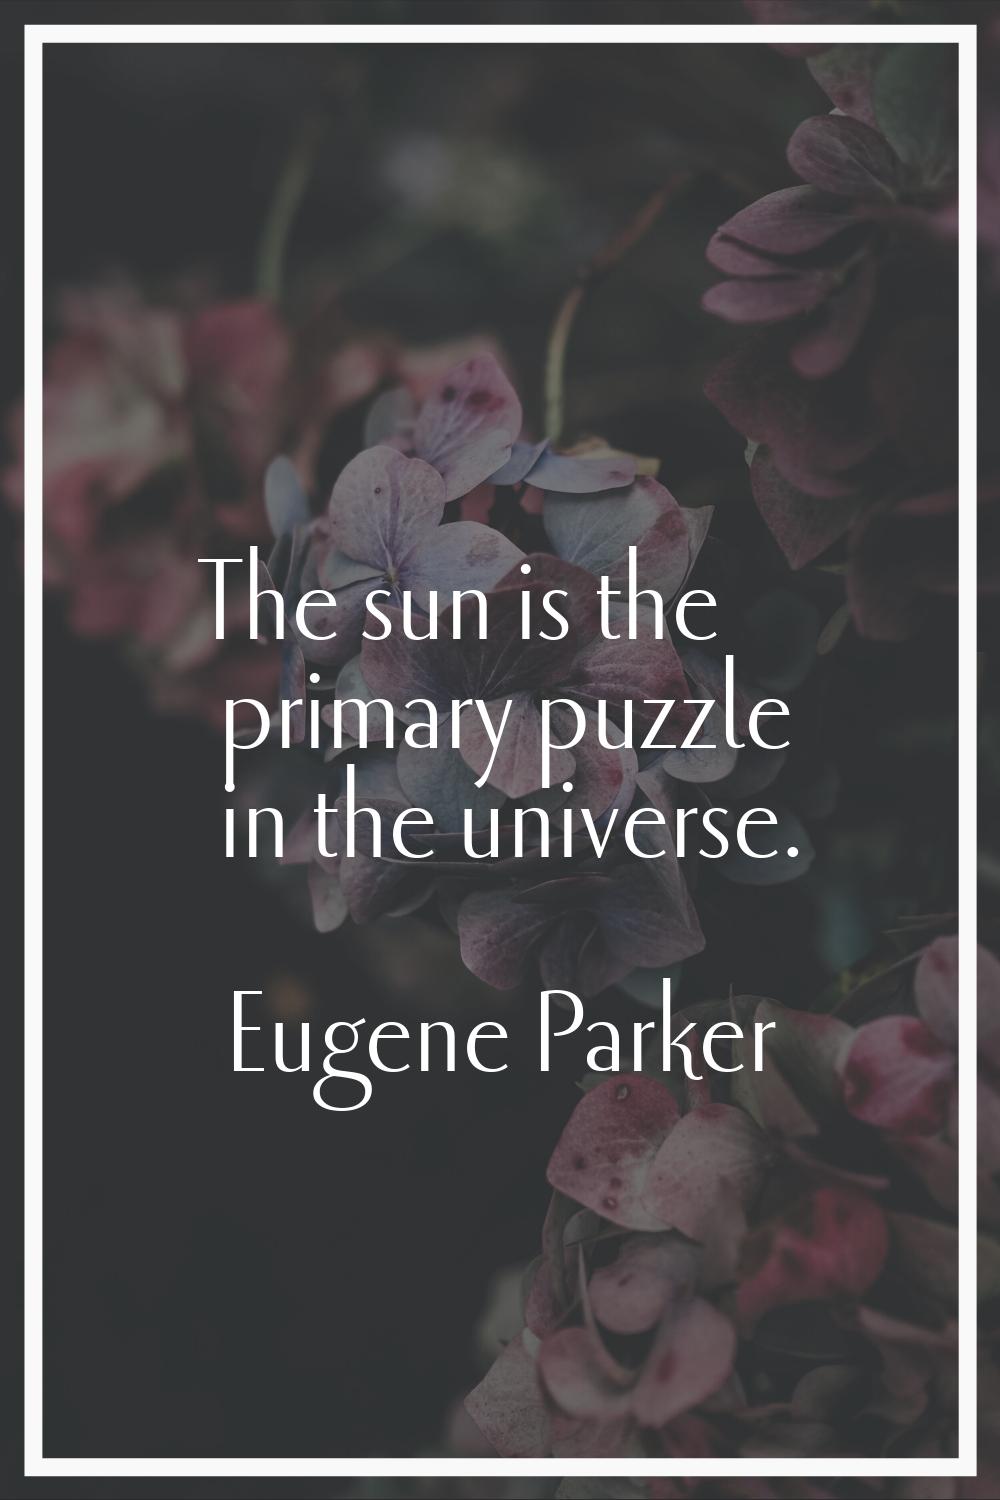 The sun is the primary puzzle in the universe.